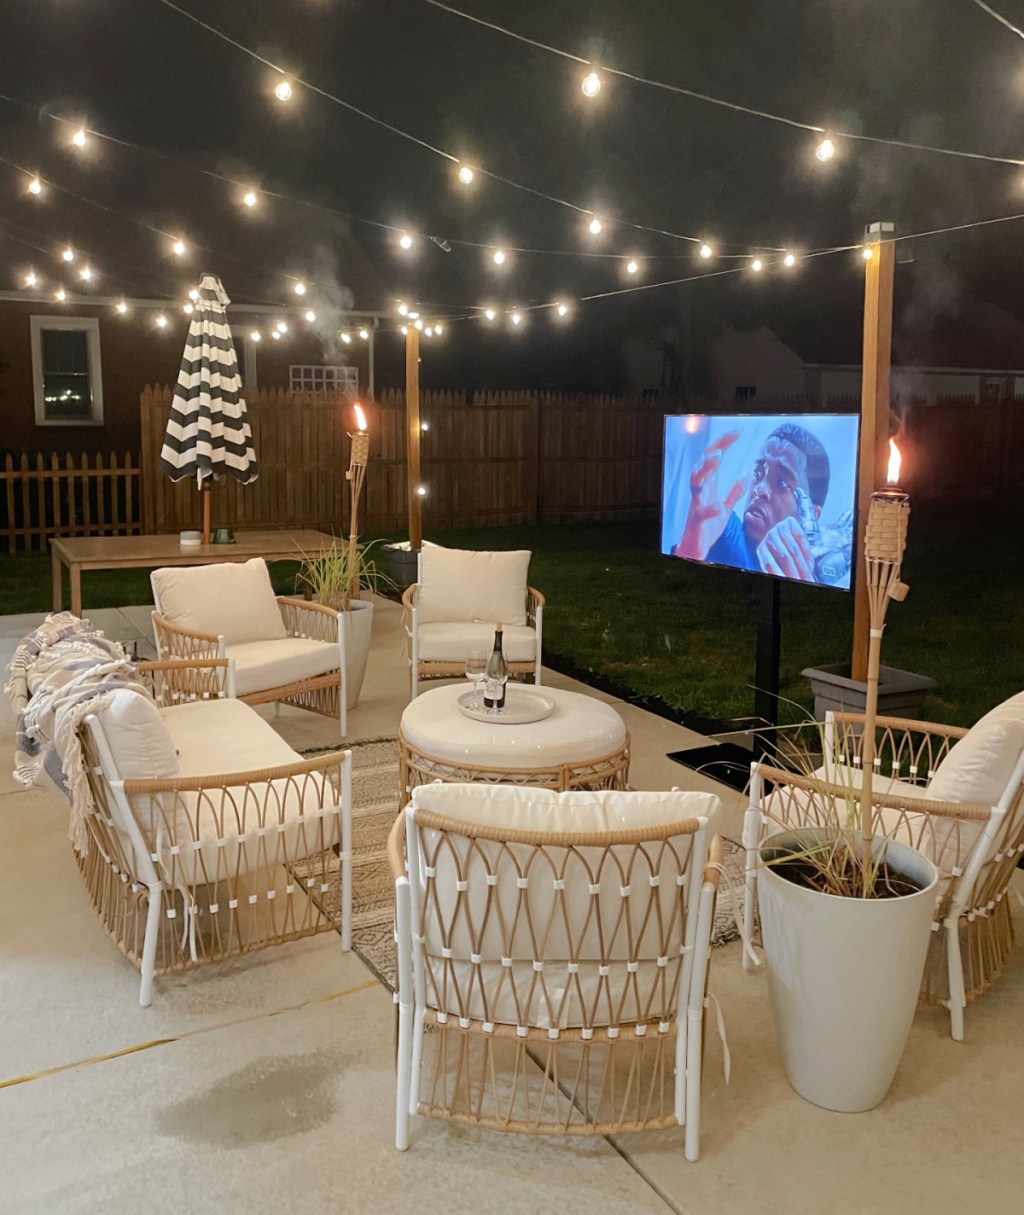 walmart outdoor furniture set up with lights and a tv screen